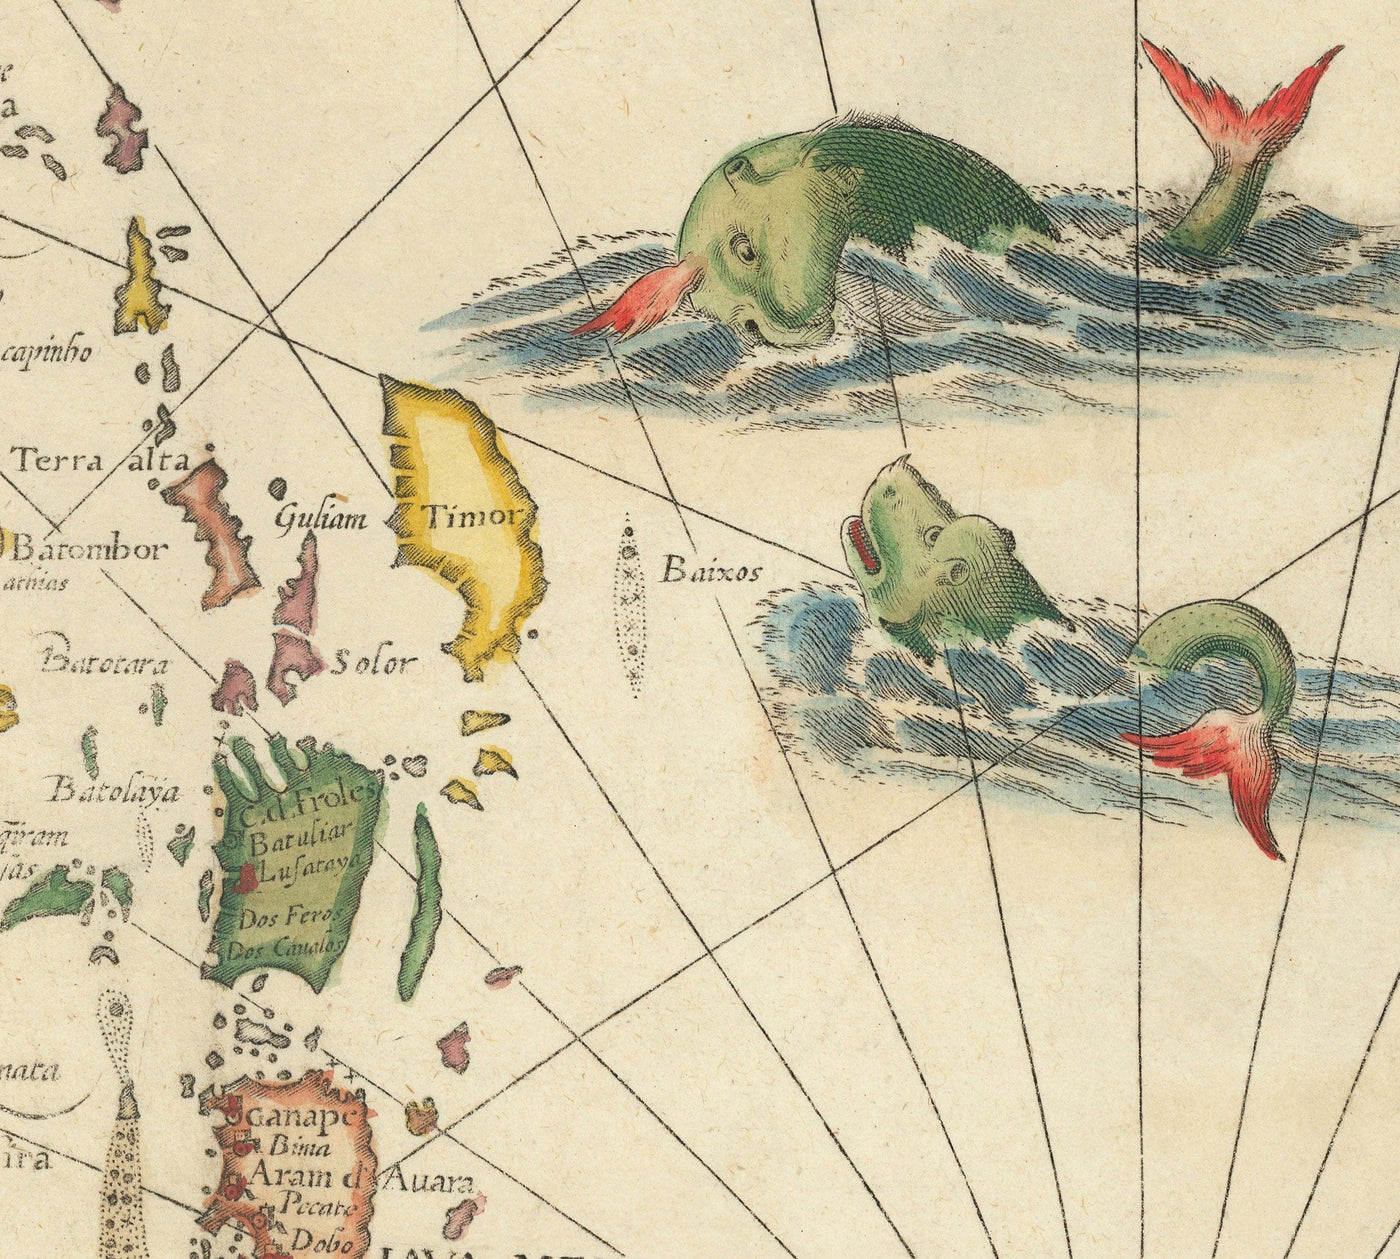 Old Map of Southeast Asia, 1596 - China, Korea, Japan, Philippines, Singapore, Malaysia, Indonesia, East Indies